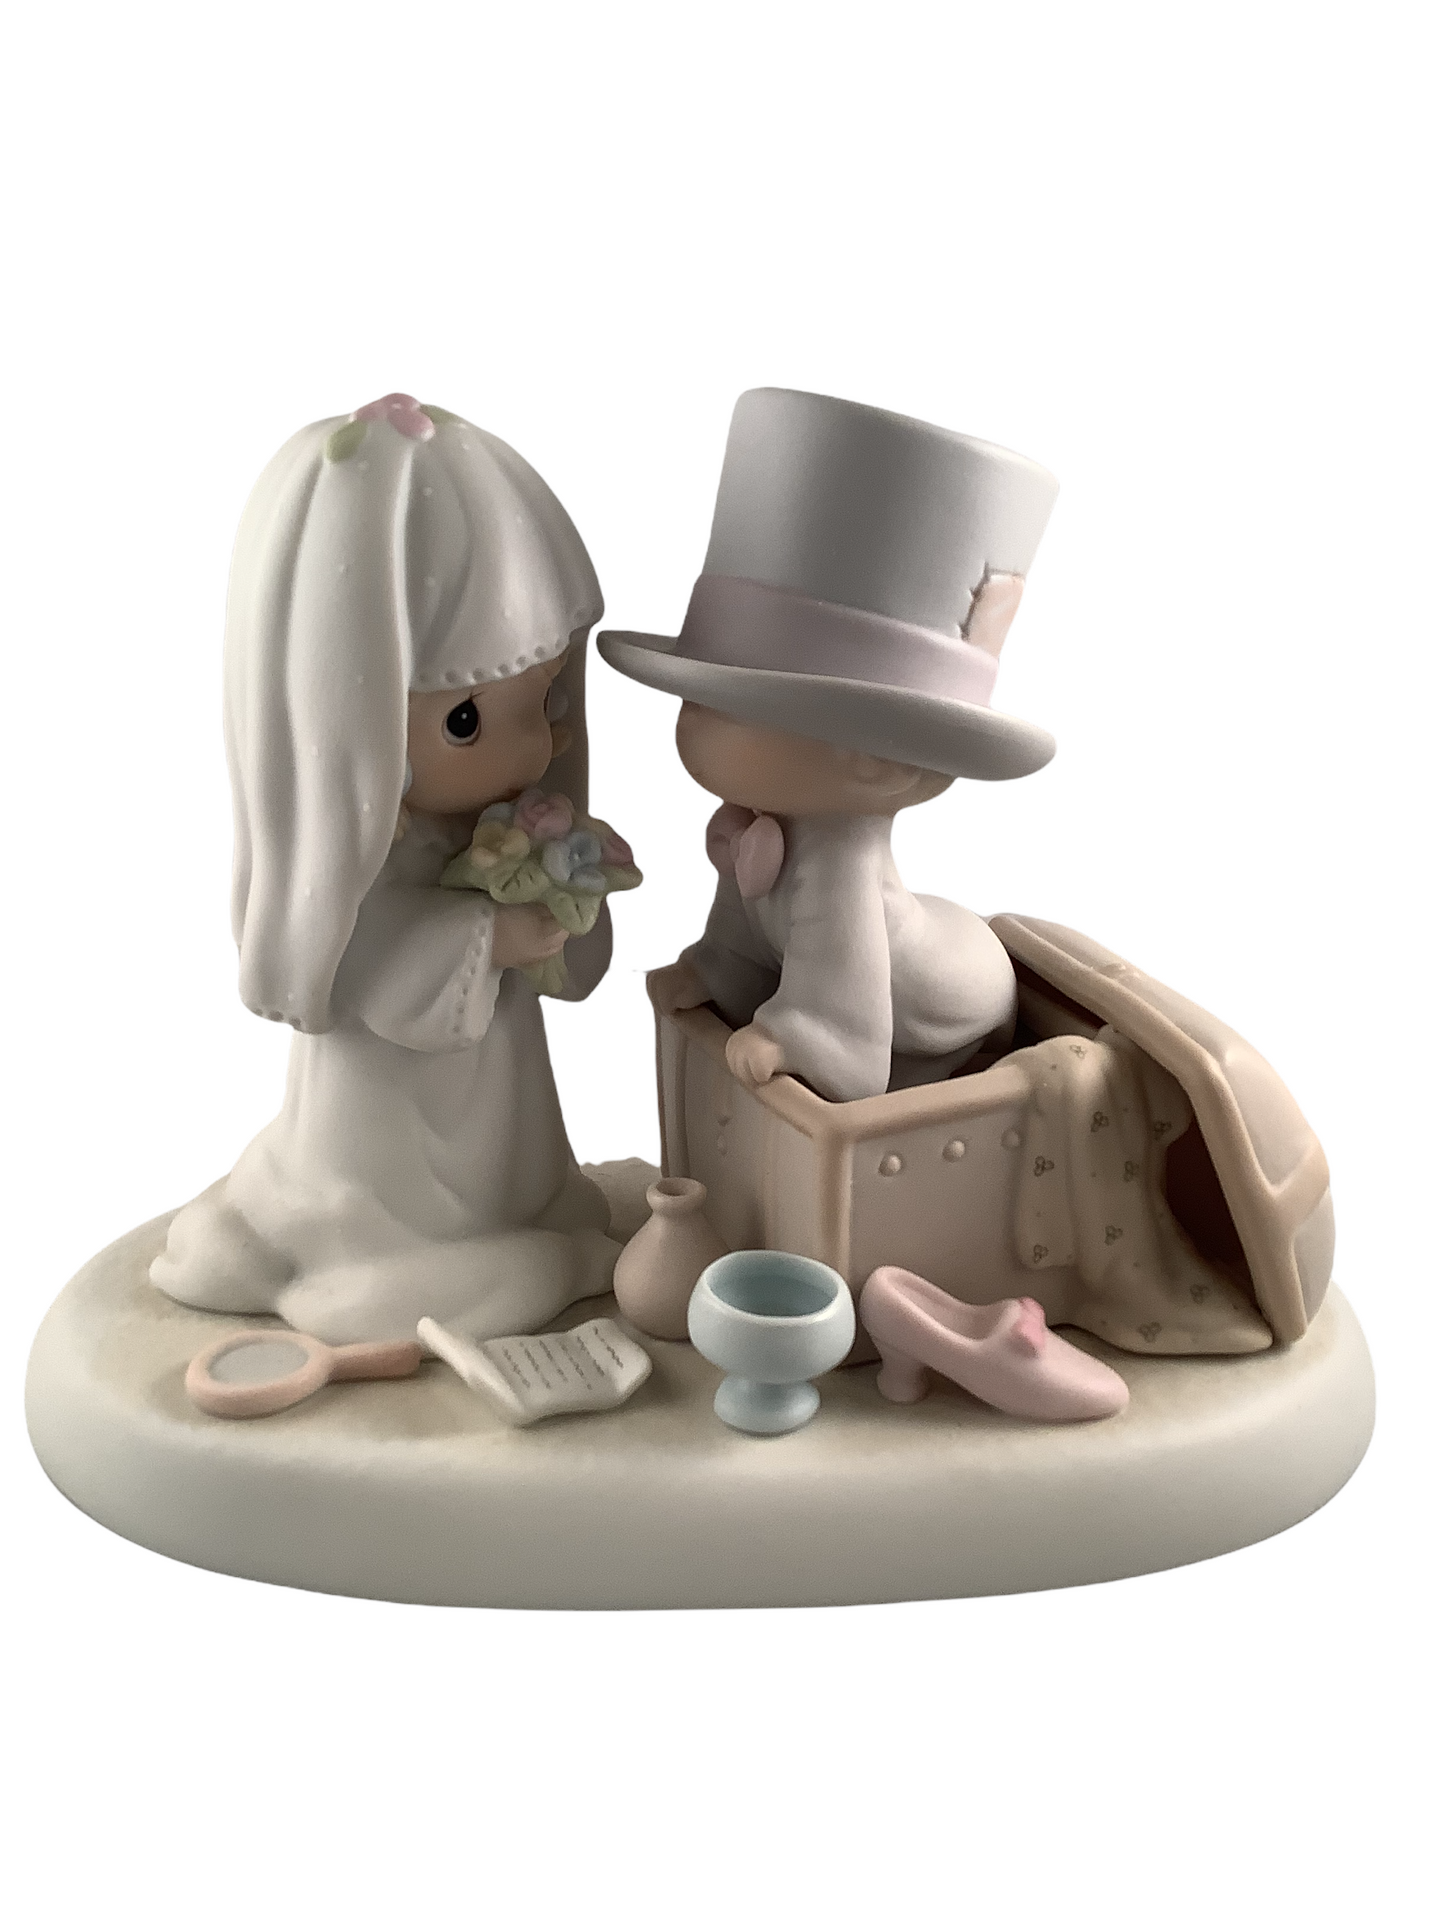 Heaven Bless Your Togetherness - Precious Moment Figurine